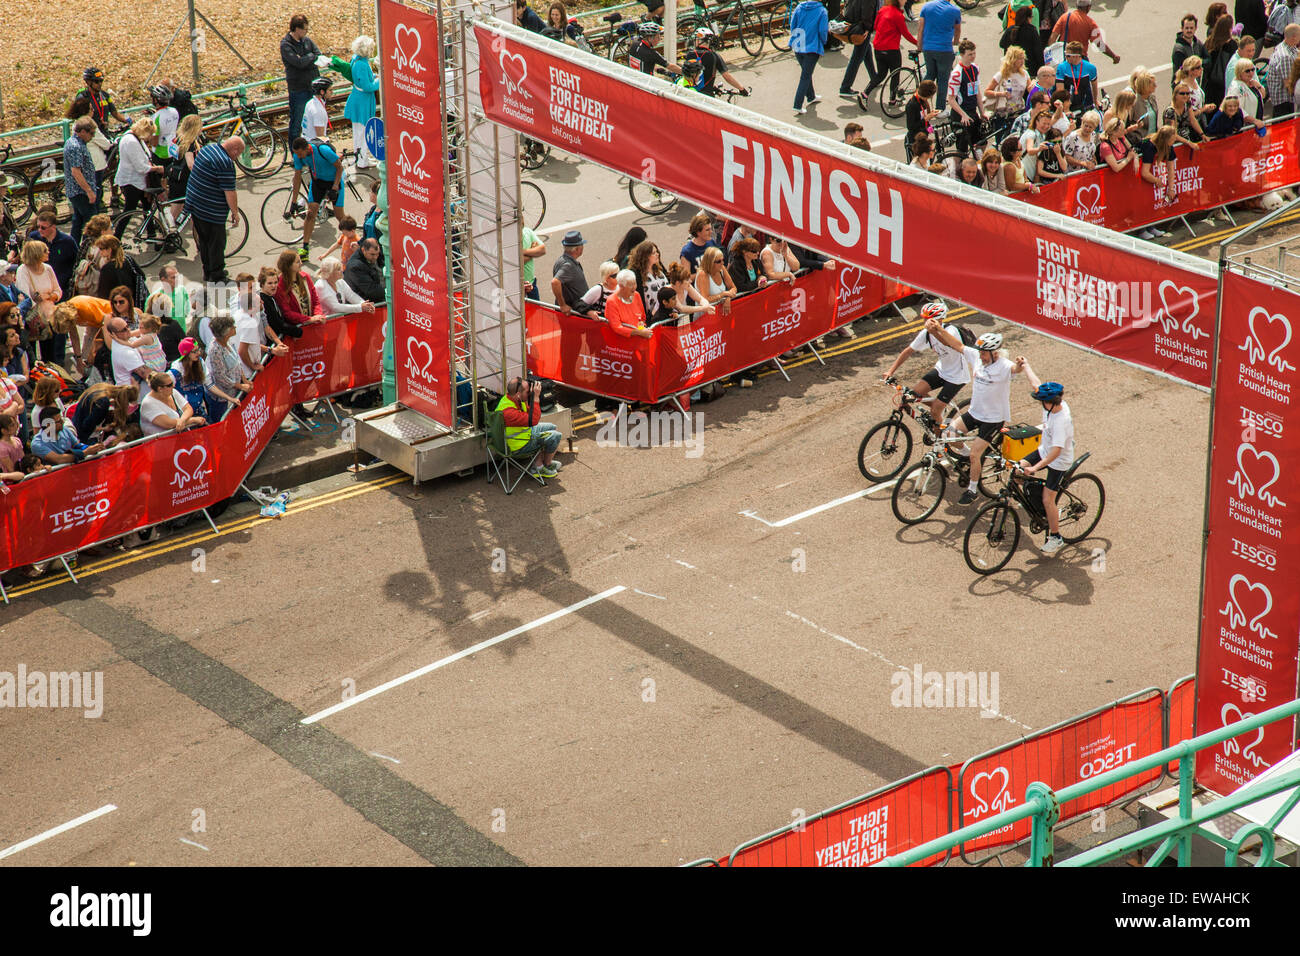 Brighton, UK. 21st June, 2015. Cyclists pass the finish line holding hands. Crowd of onlookers cheers. Credit:  Slawek Staszczuk/Alamy Live News Stock Photo